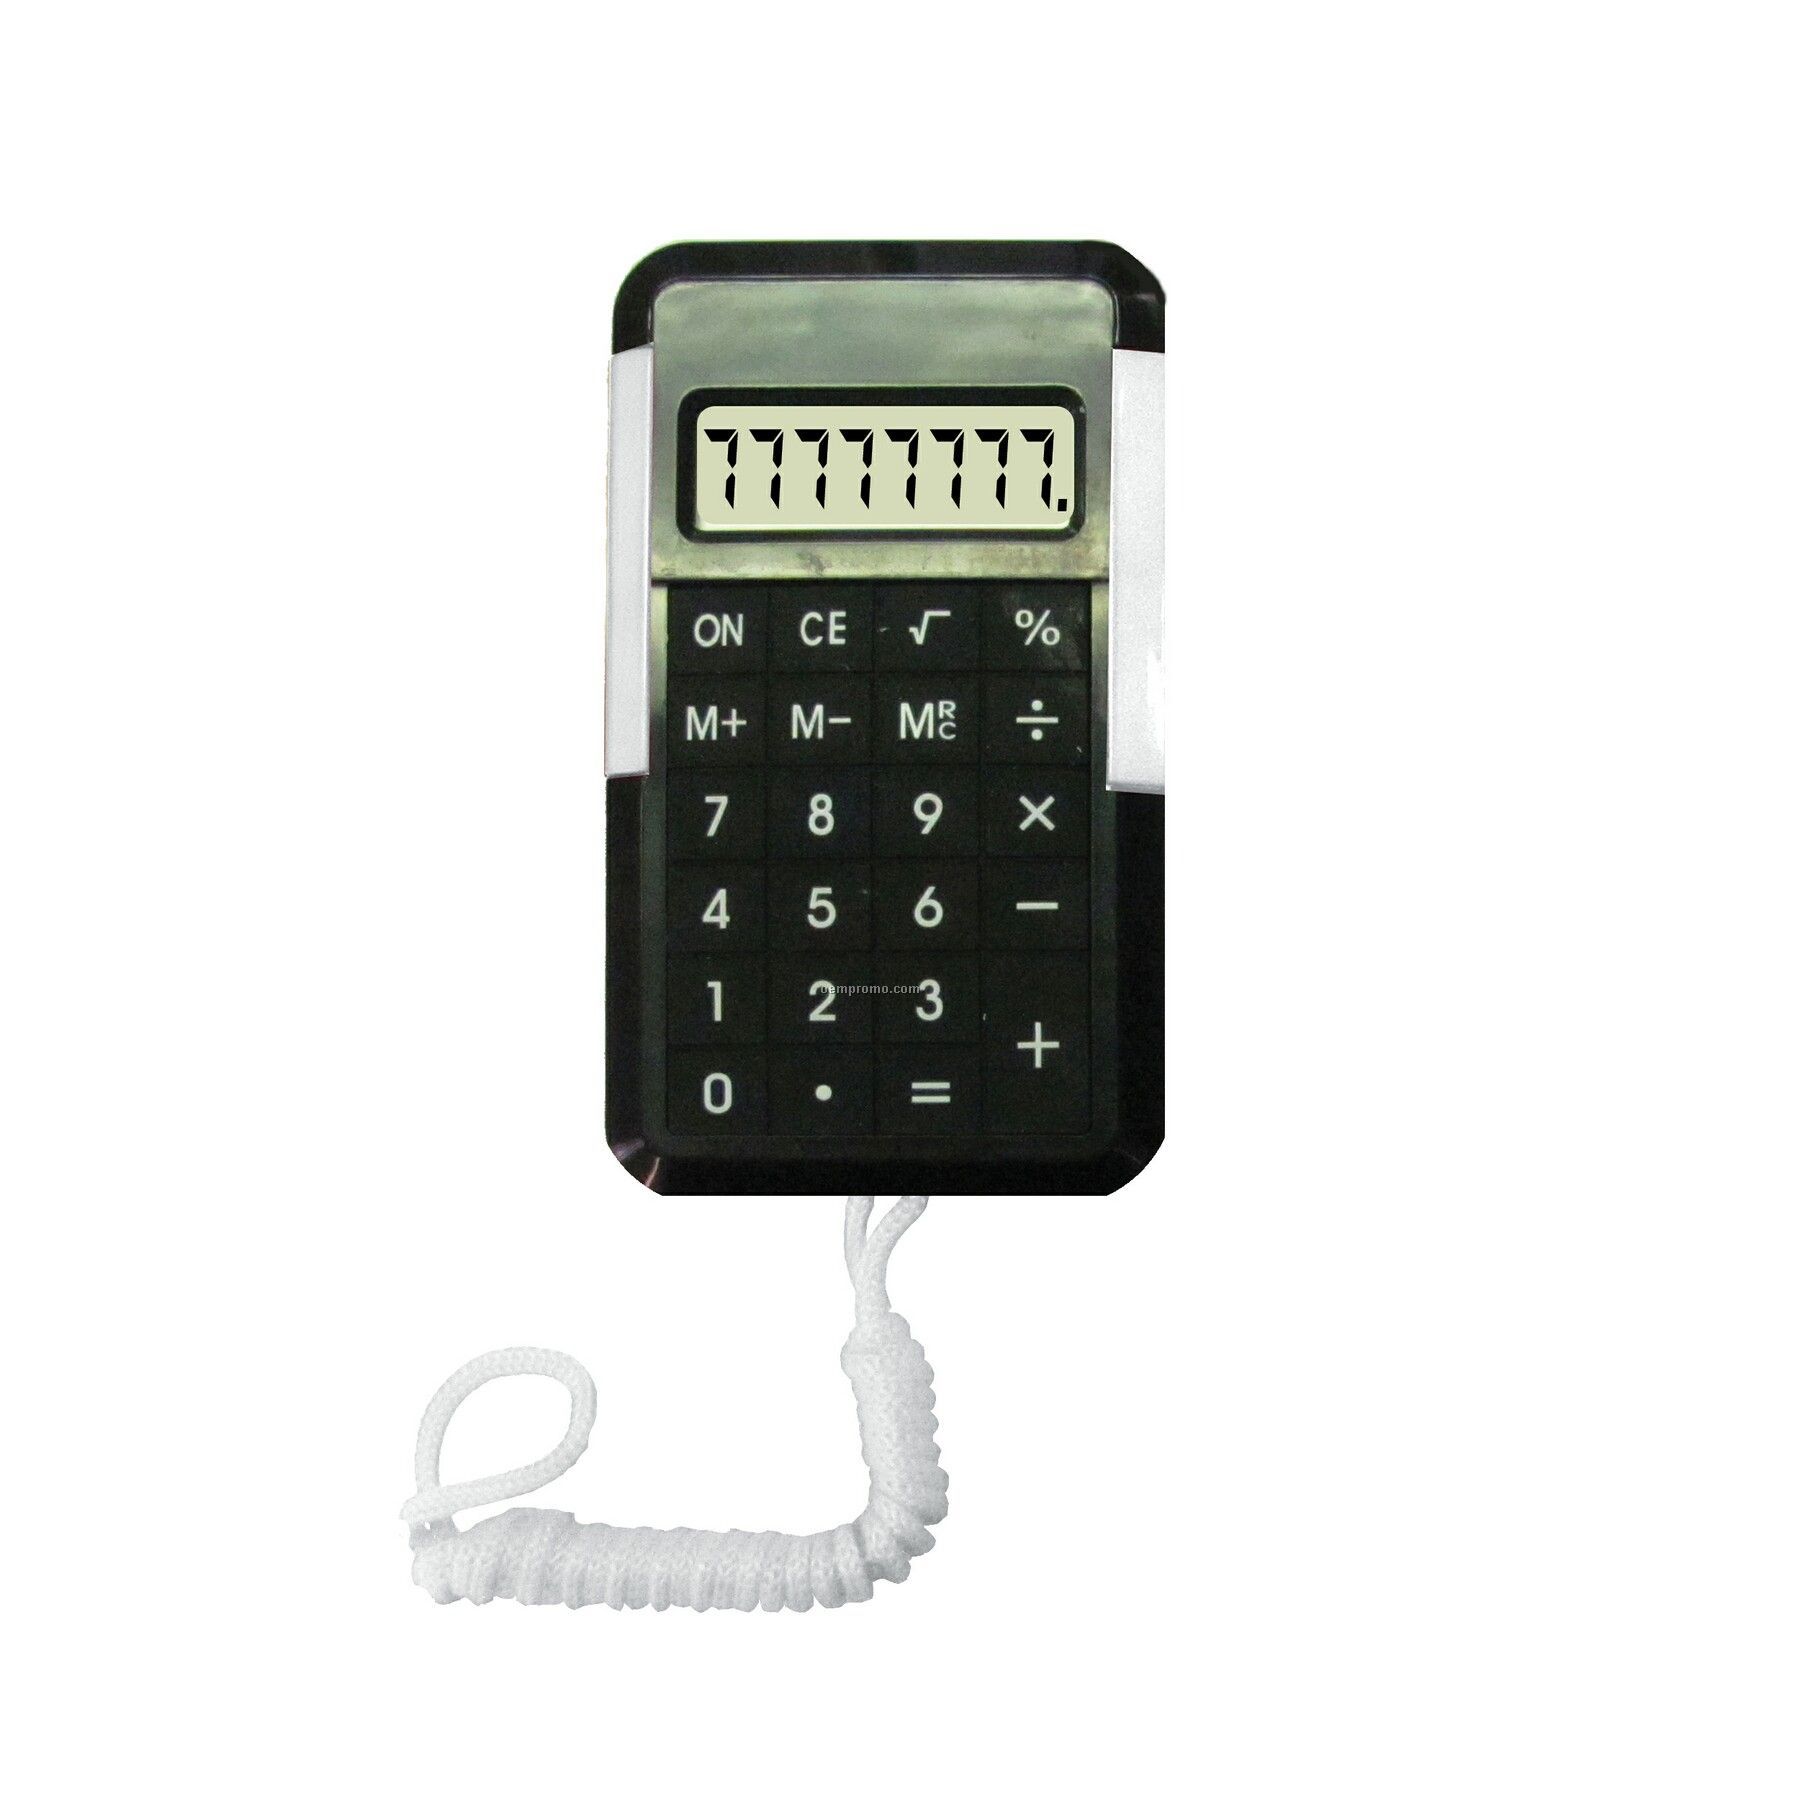 8 Digit Calculator With Neck Strap / Lanyard/ String